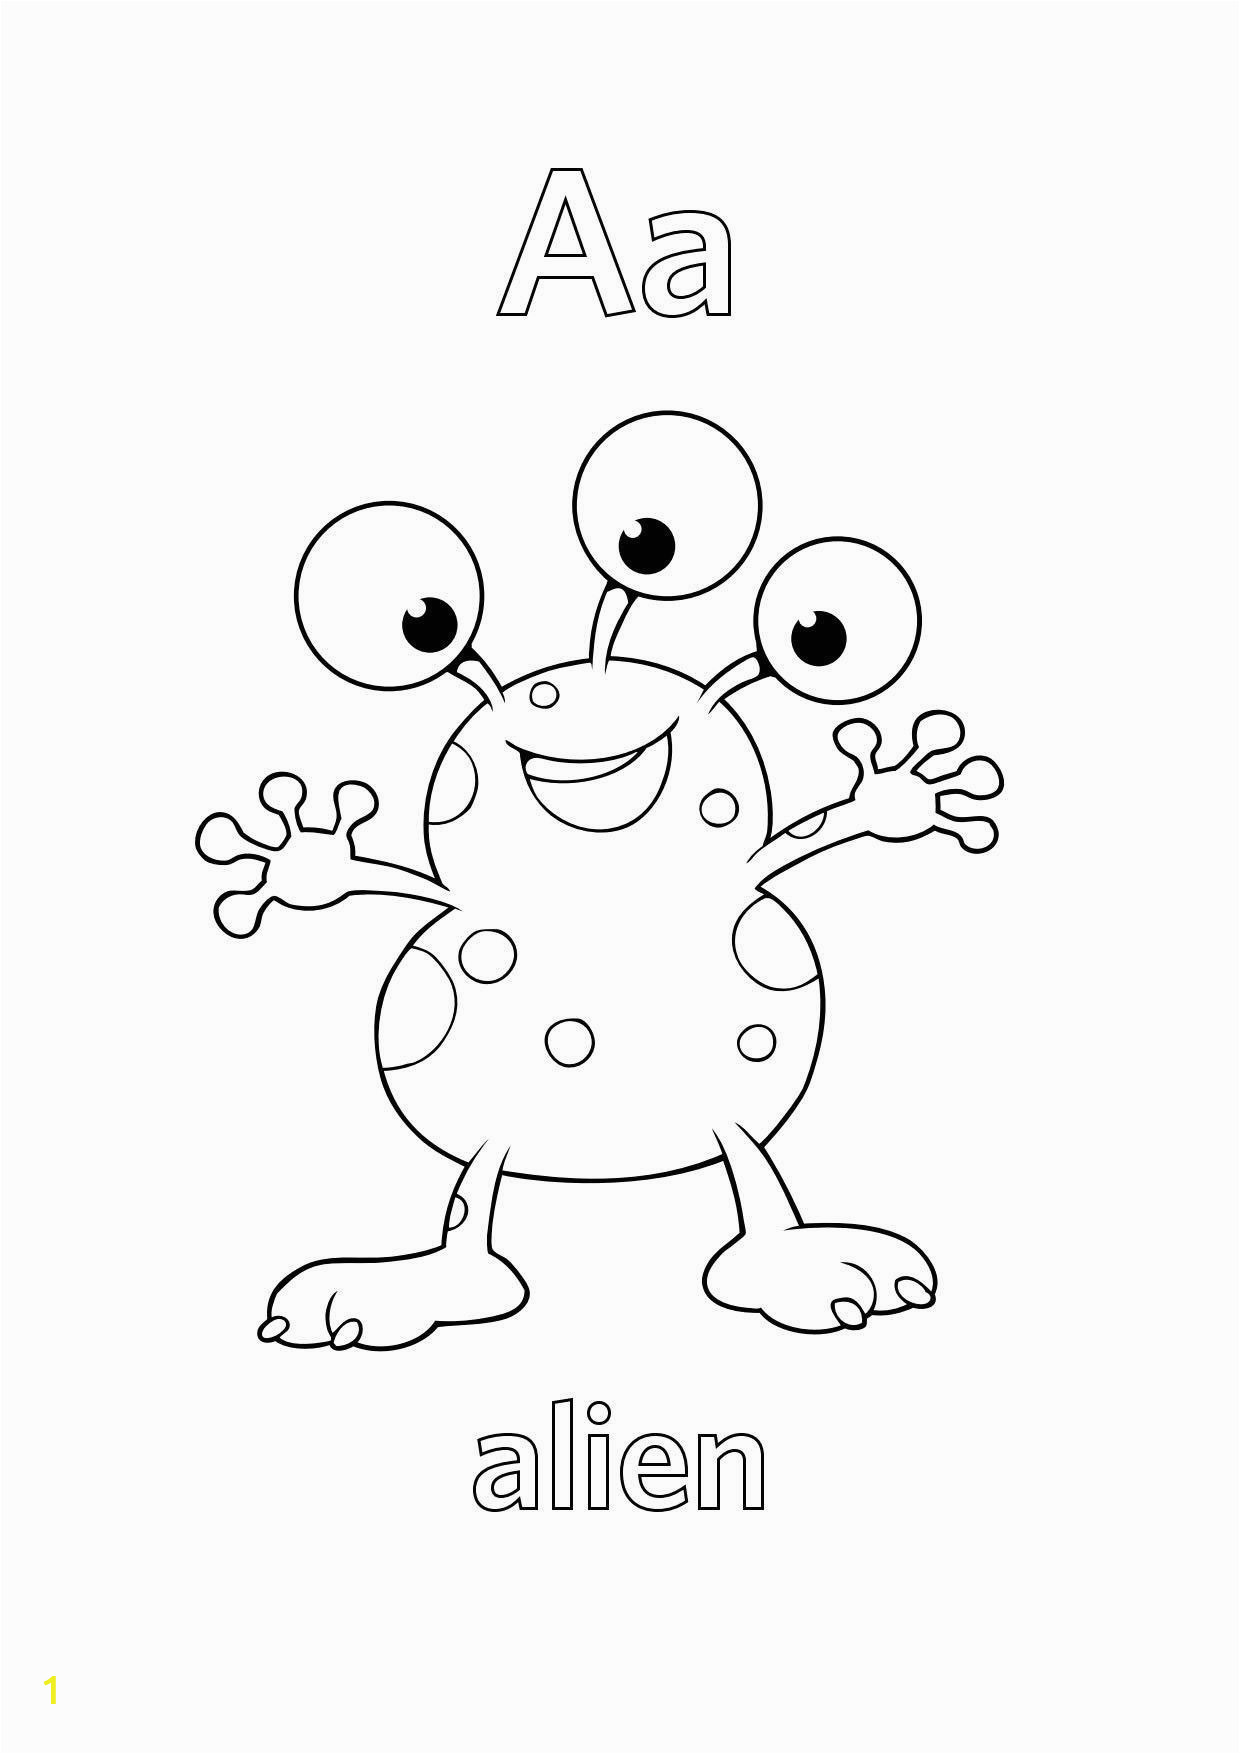 printable coloring pages to print alphabet letters alphabet worksheet lowercase letters worksheet alphabet of coloring pages to print alphabet letters